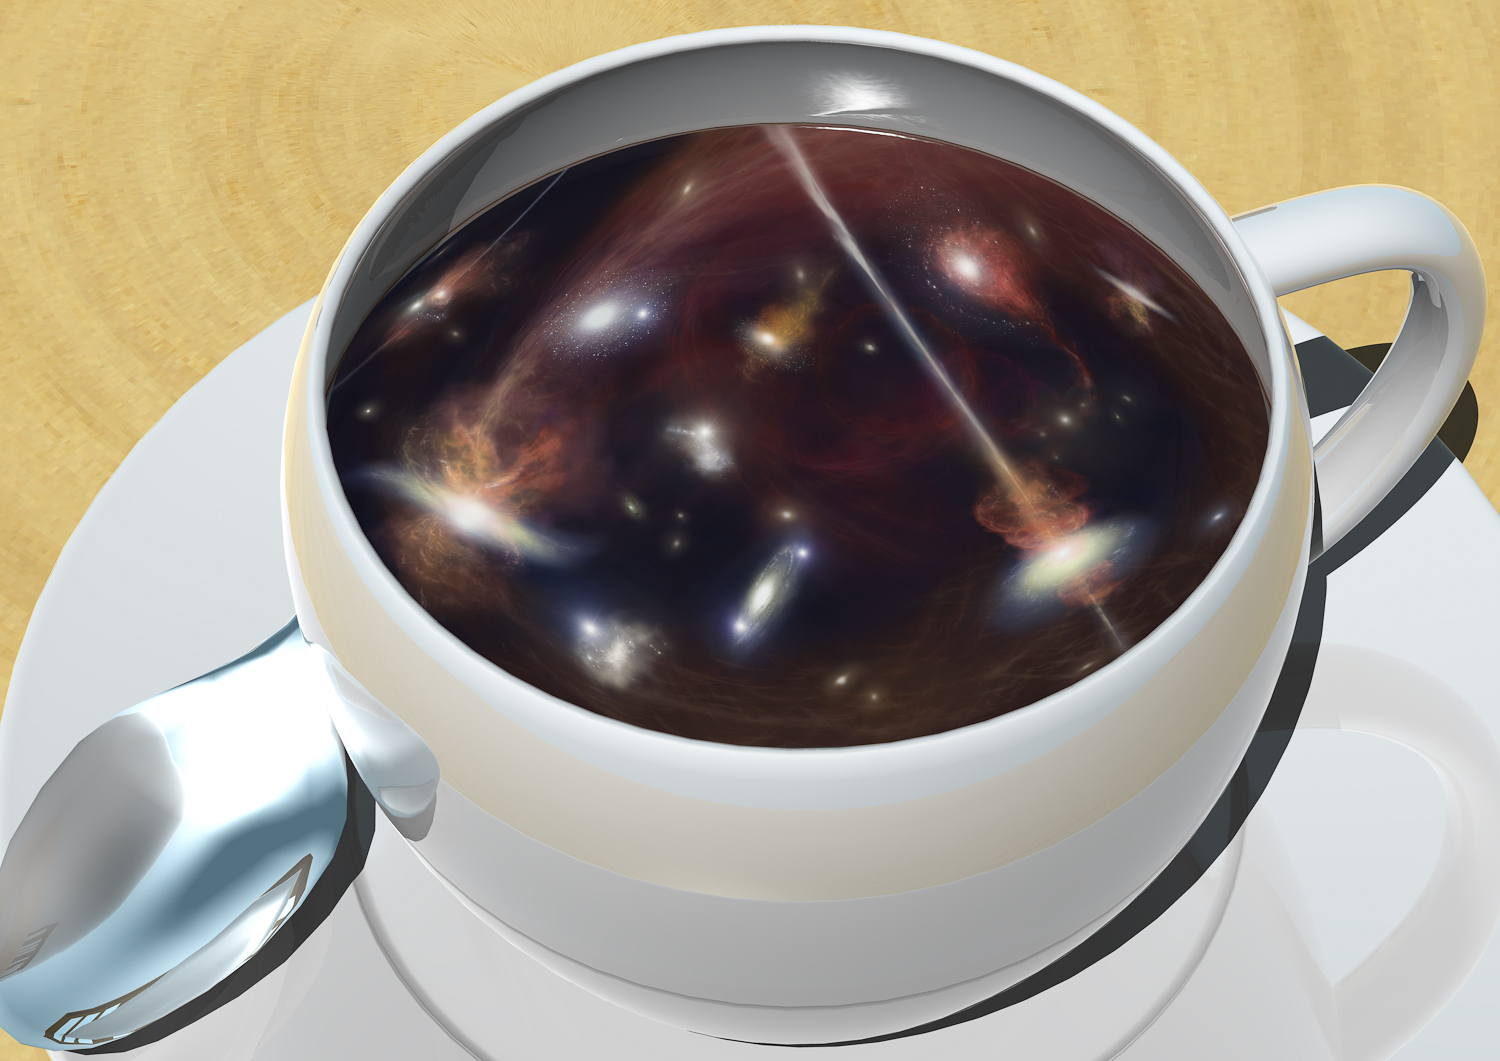 Universe in a cup